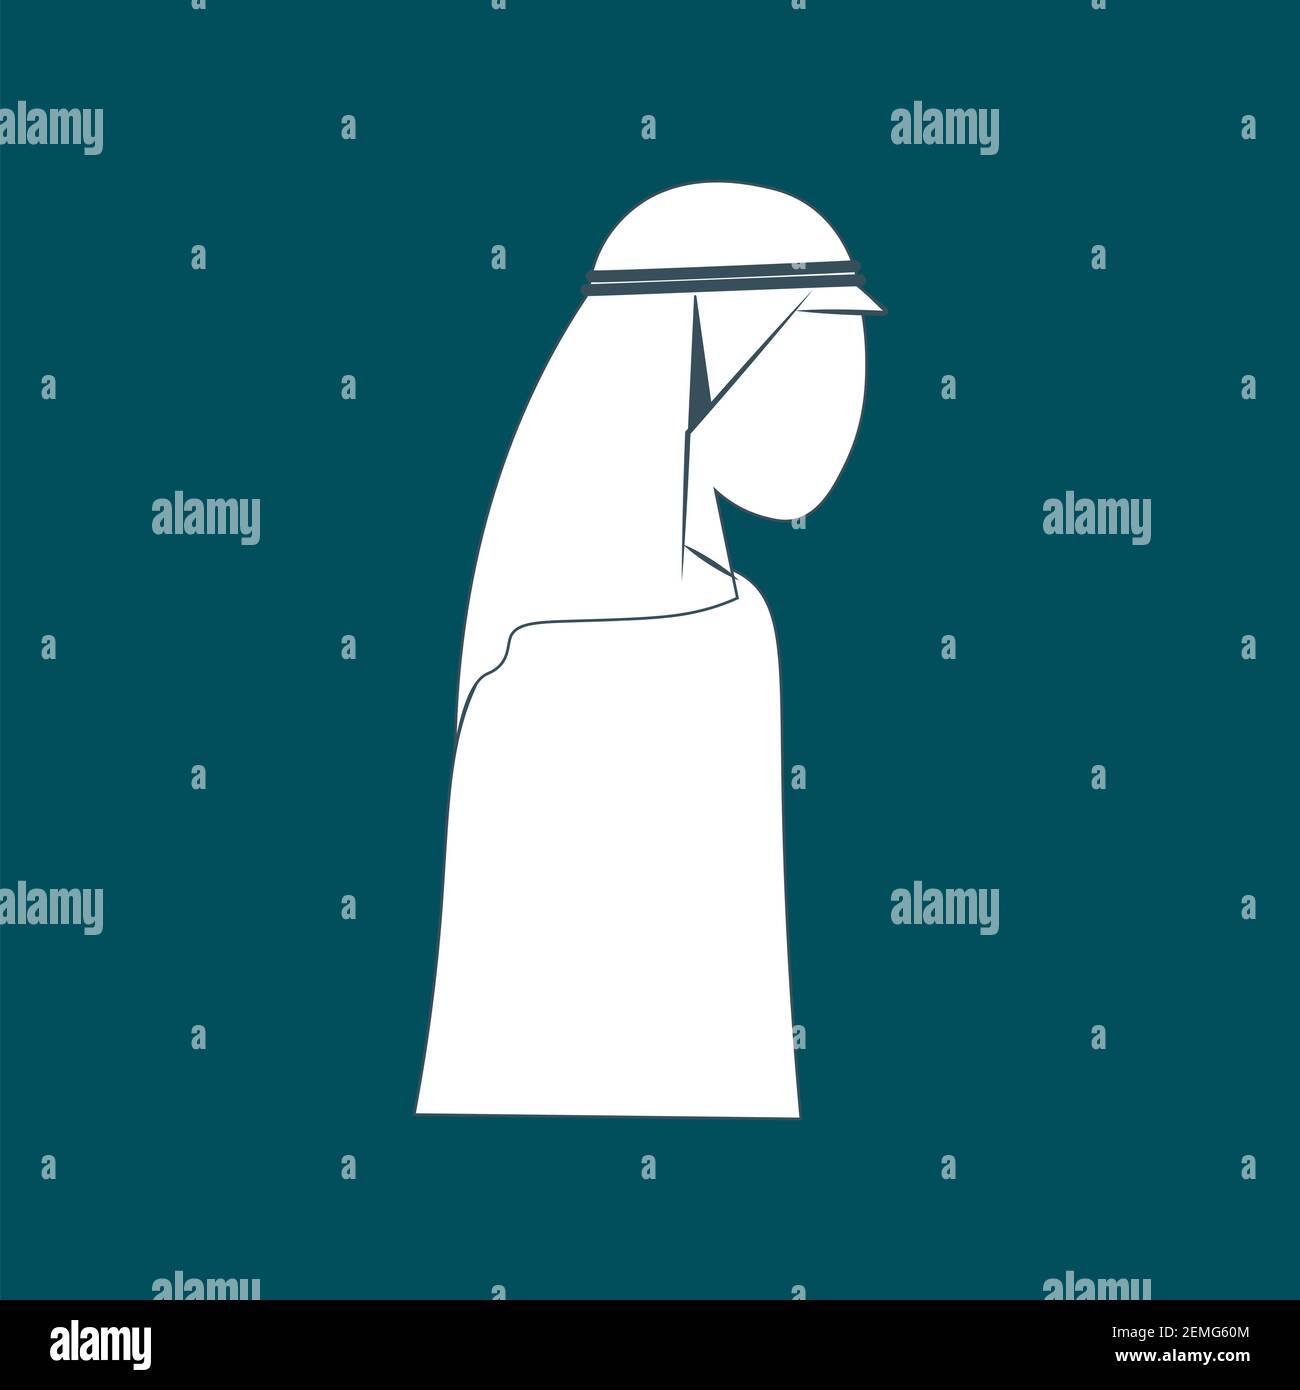 Arab man with Shumakh flat design, A Saudi man icon wearing shemagh and a thobe Stock Vector